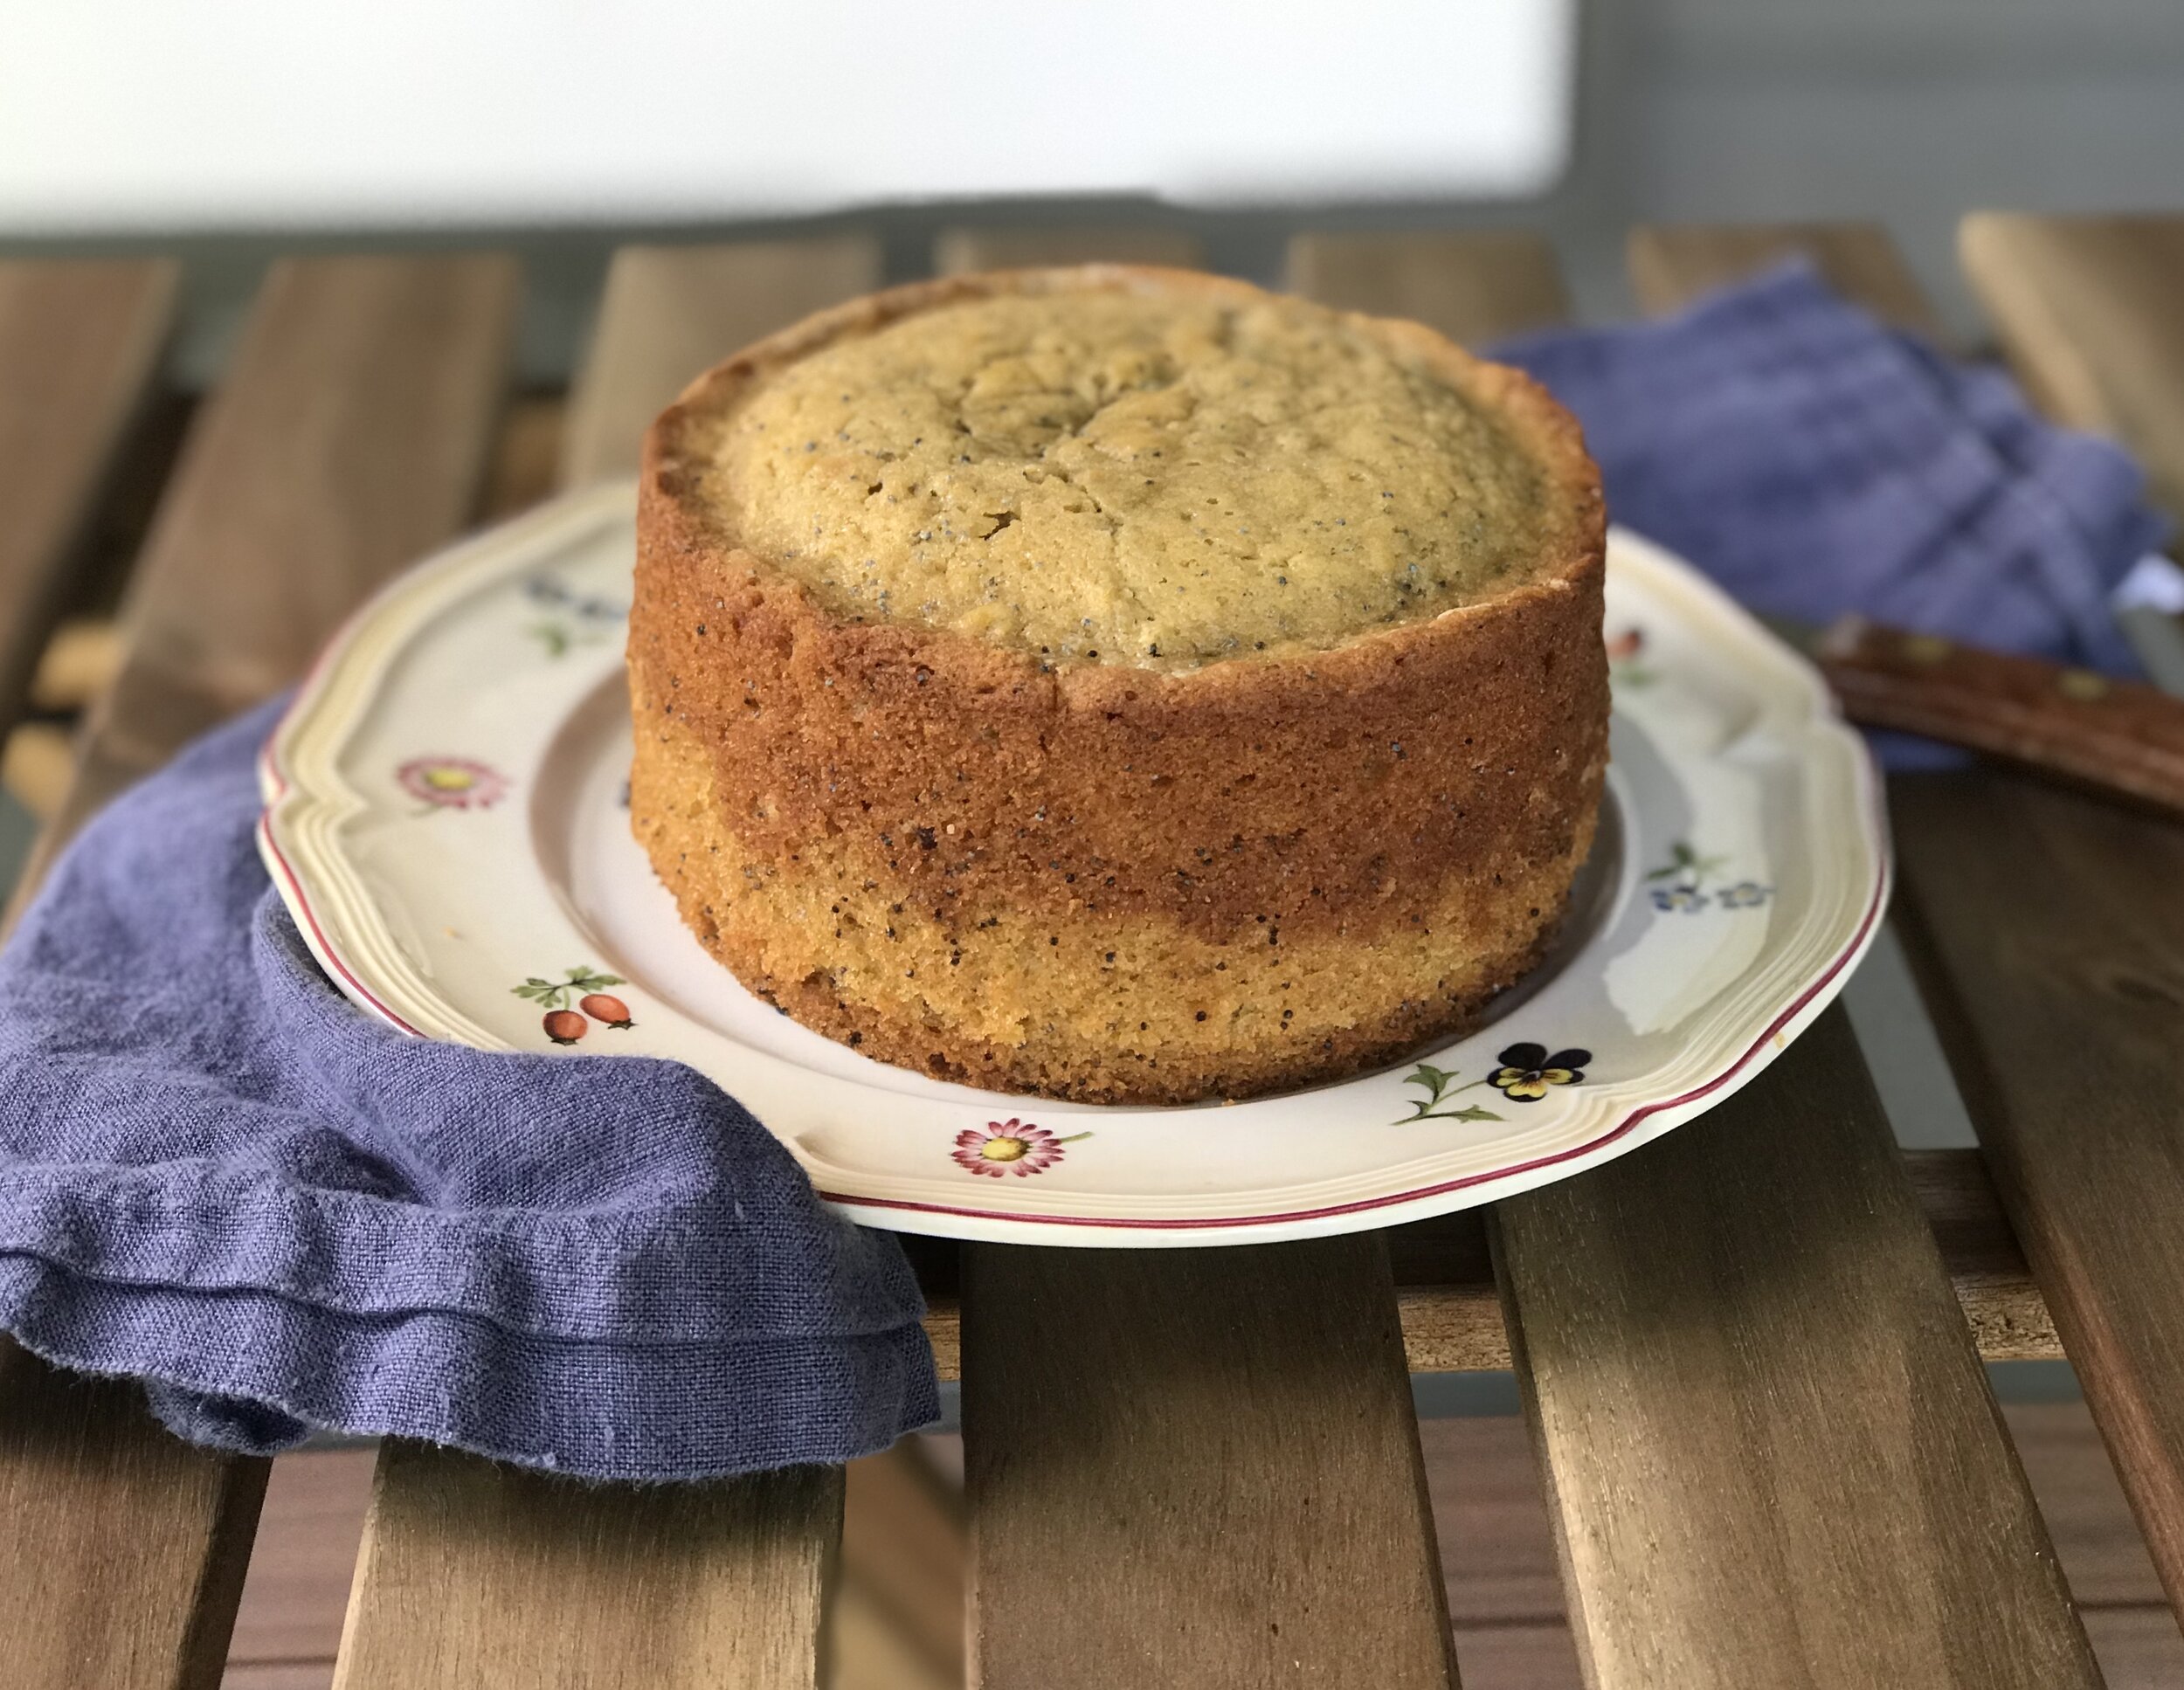  This lil’ lemon cake was baked in a six-inch diameter springform cake pan. 